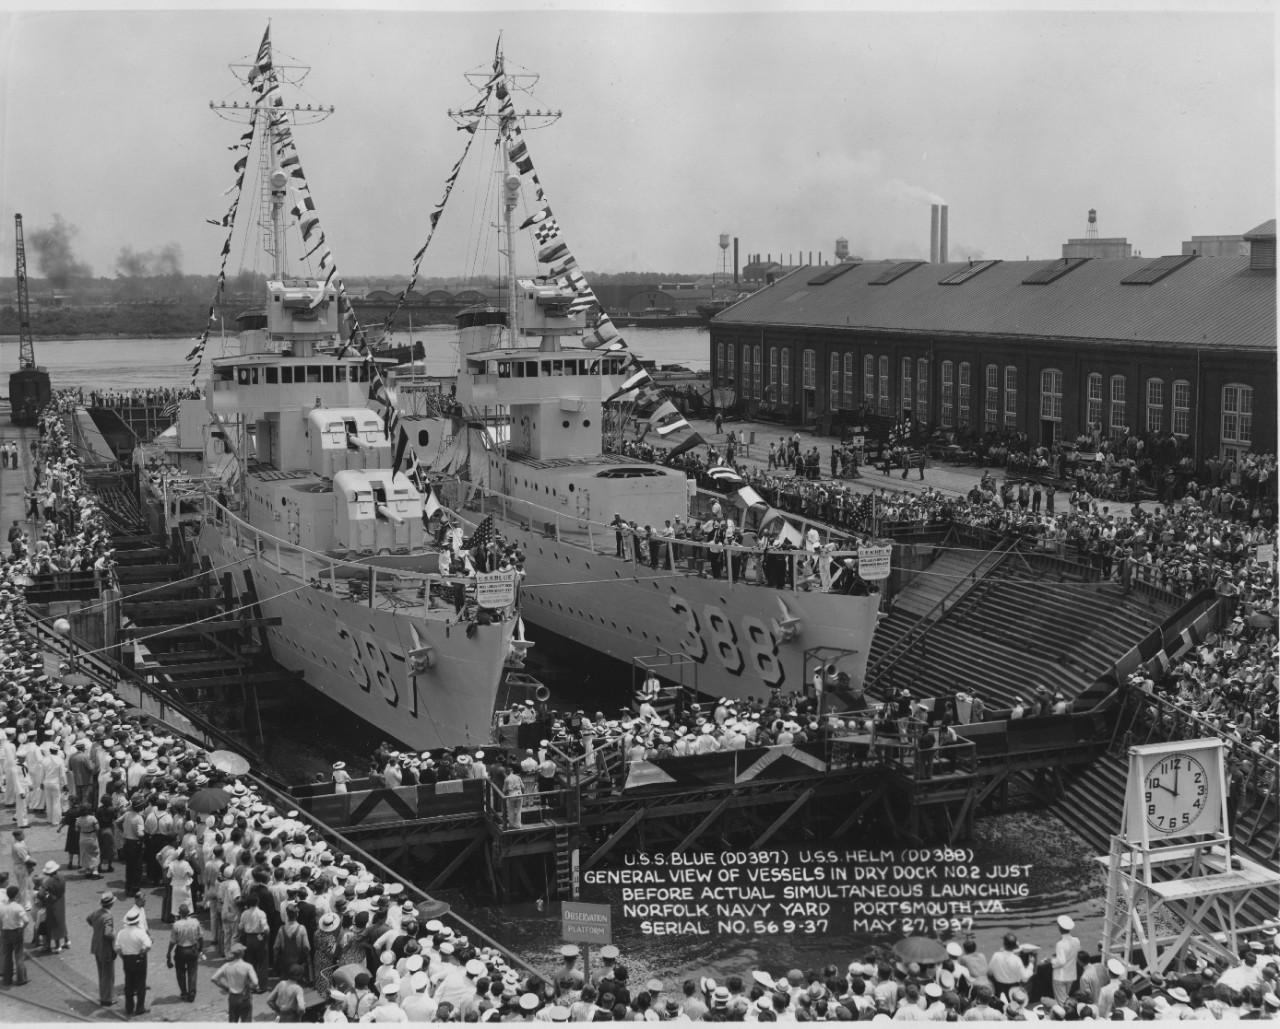 Blue (DD-387) (L) and Helm await christening in the partially flooded Dry Dock No. 2 at the Norfolk Navy Yard, 27 May 1937. Blue appears to have her guns and torpedo tubes installed, and both ships’ Mk. 33 main battery gun directors are in place....